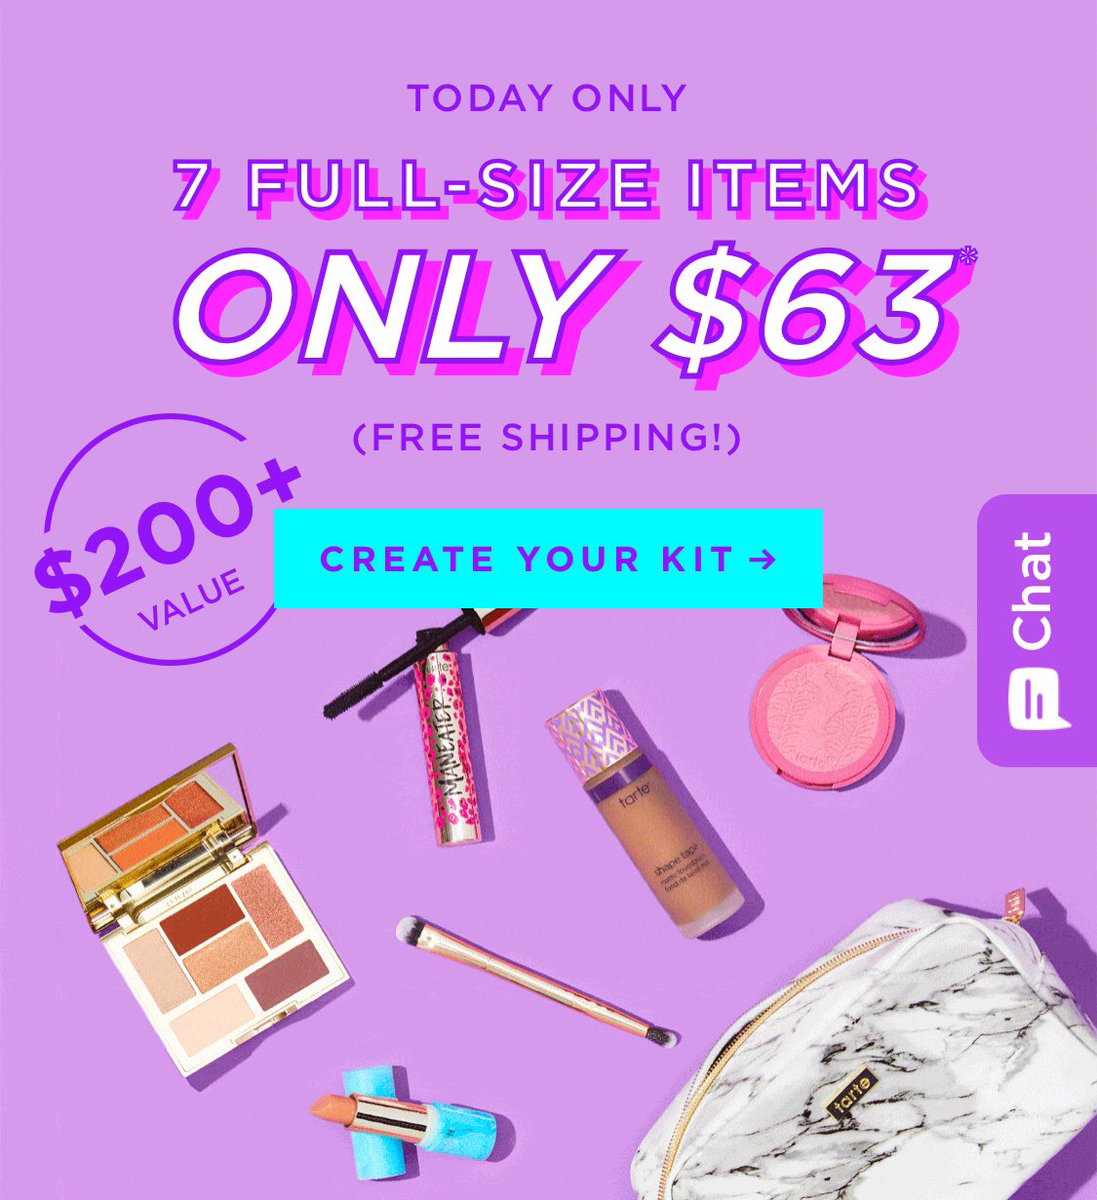 I love a great deal! TODAY ONLY! TARTE $63 USD kit with 7 full-size items. +200 USD value! Here’s the link rstyle.me/+QIY7IbiEFhn7t…